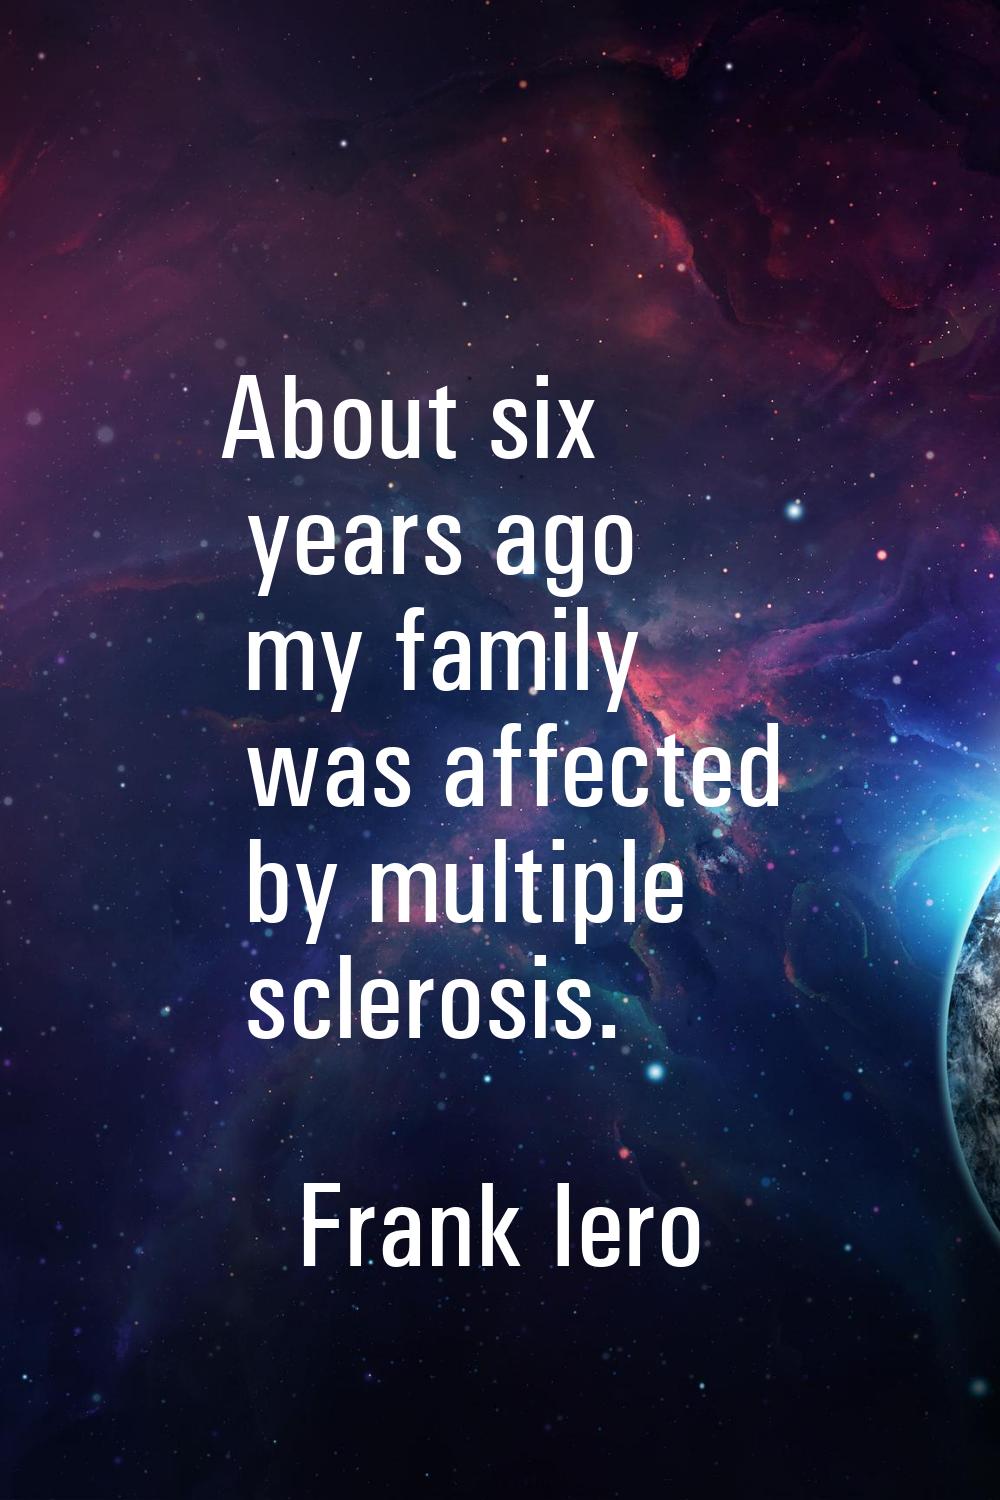 About six years ago my family was affected by multiple sclerosis.